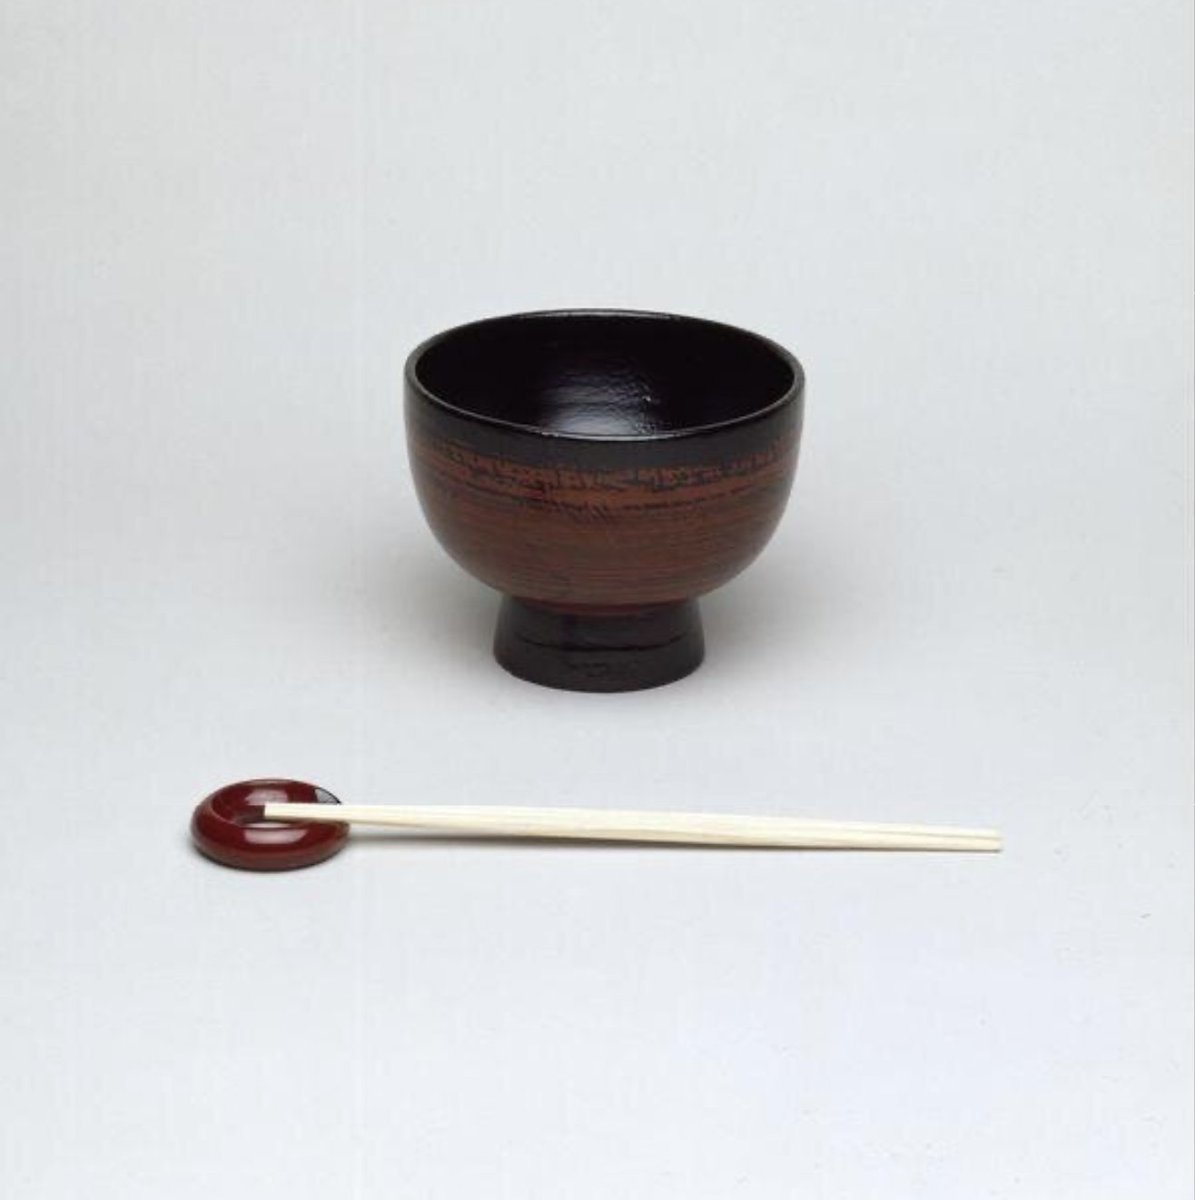 In partnership with Circle of Japanese Art London, we will host a zoom lecture with Masami Yamada @V_and_A exploring the impact of the recent earthquake in Noto Peninsula on Japan's lacquer industry. Join us on Wed. 8 May at 12.00pm (BST). Register now 👉 loom.ly/FCRRPKc